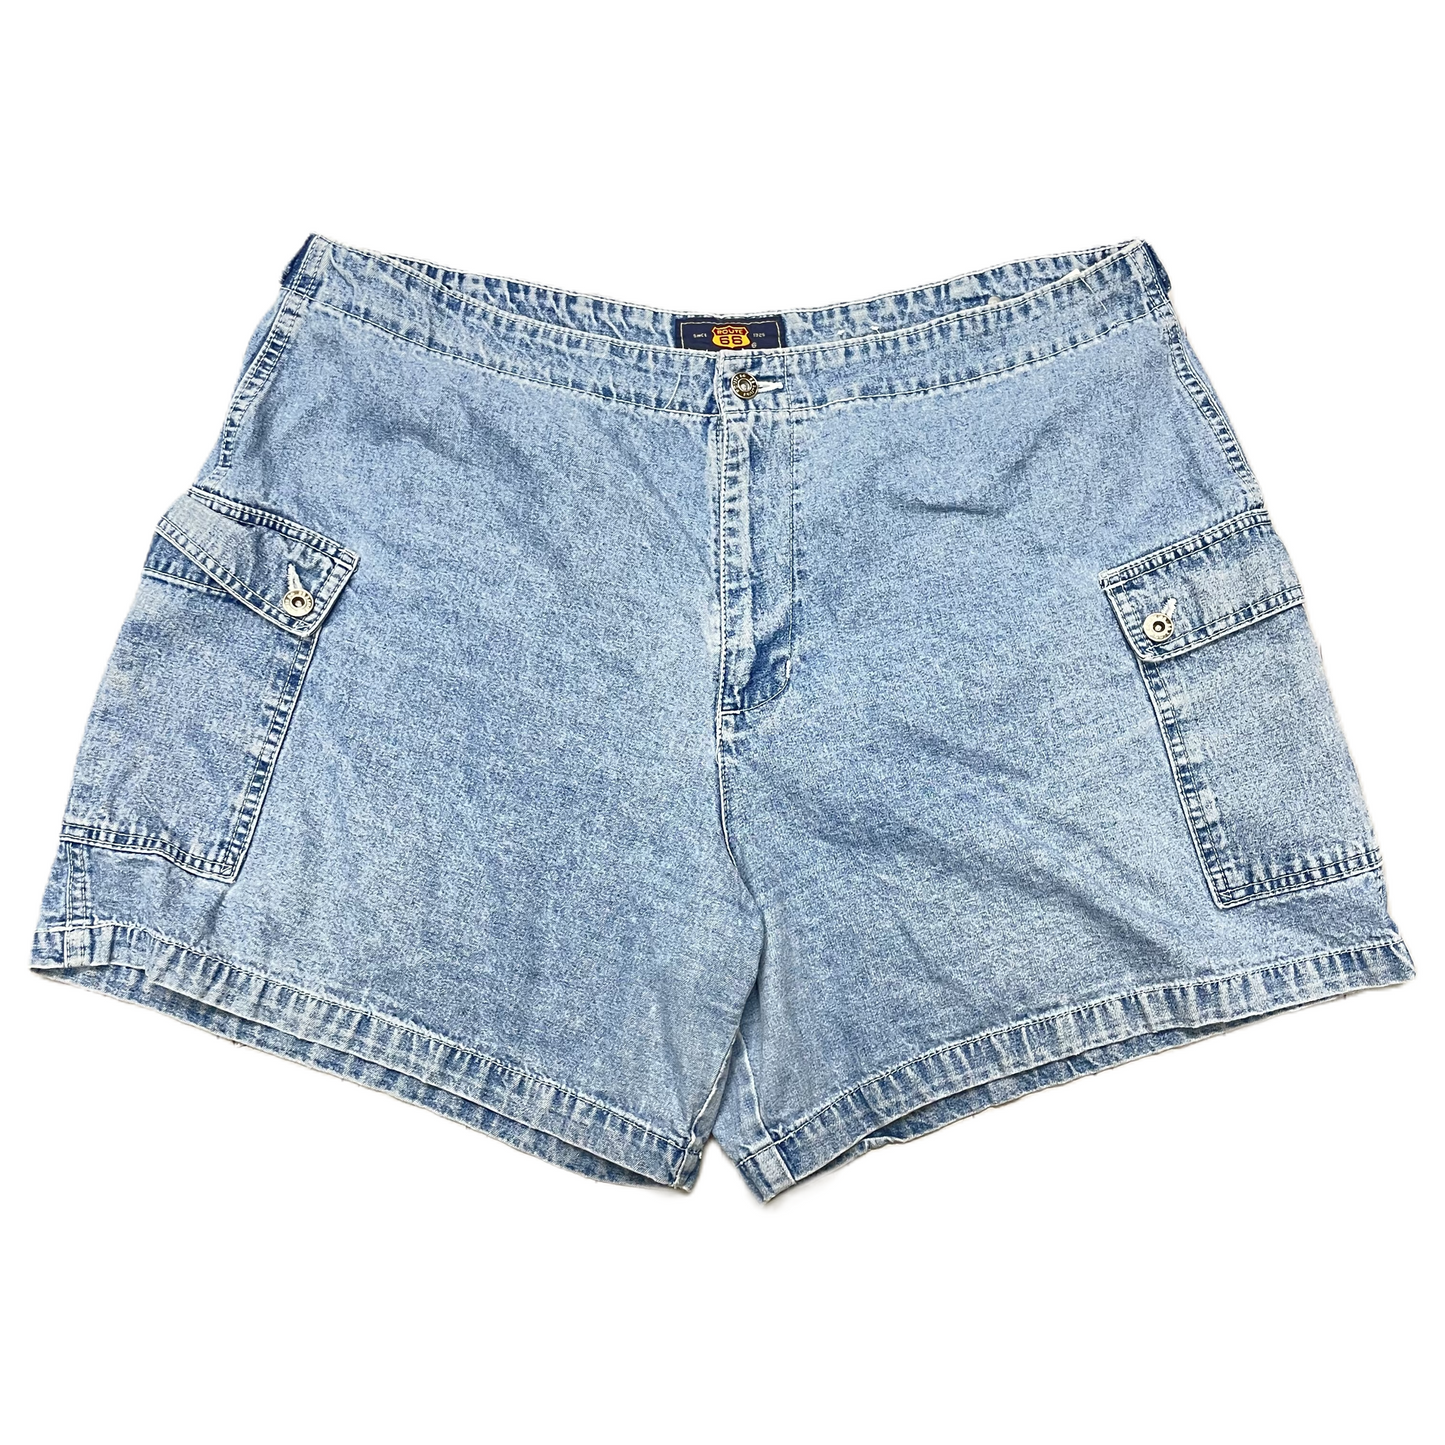 Blue Shorts By Route 66, Size: 22